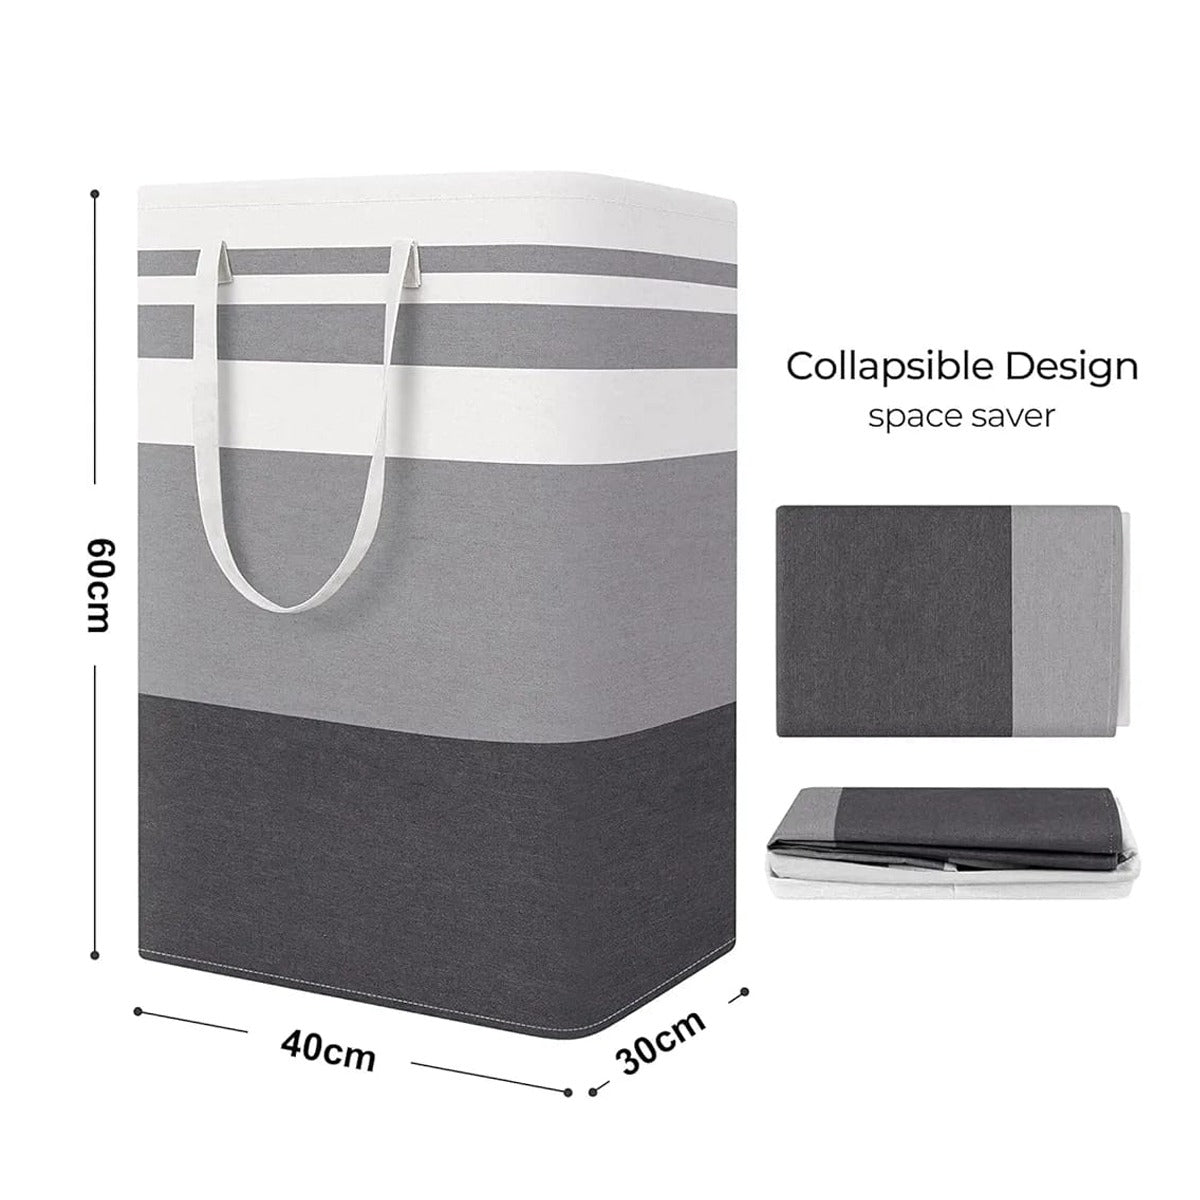 Size of A Women Holds Foldable Cloth Storage Laundry Bin.